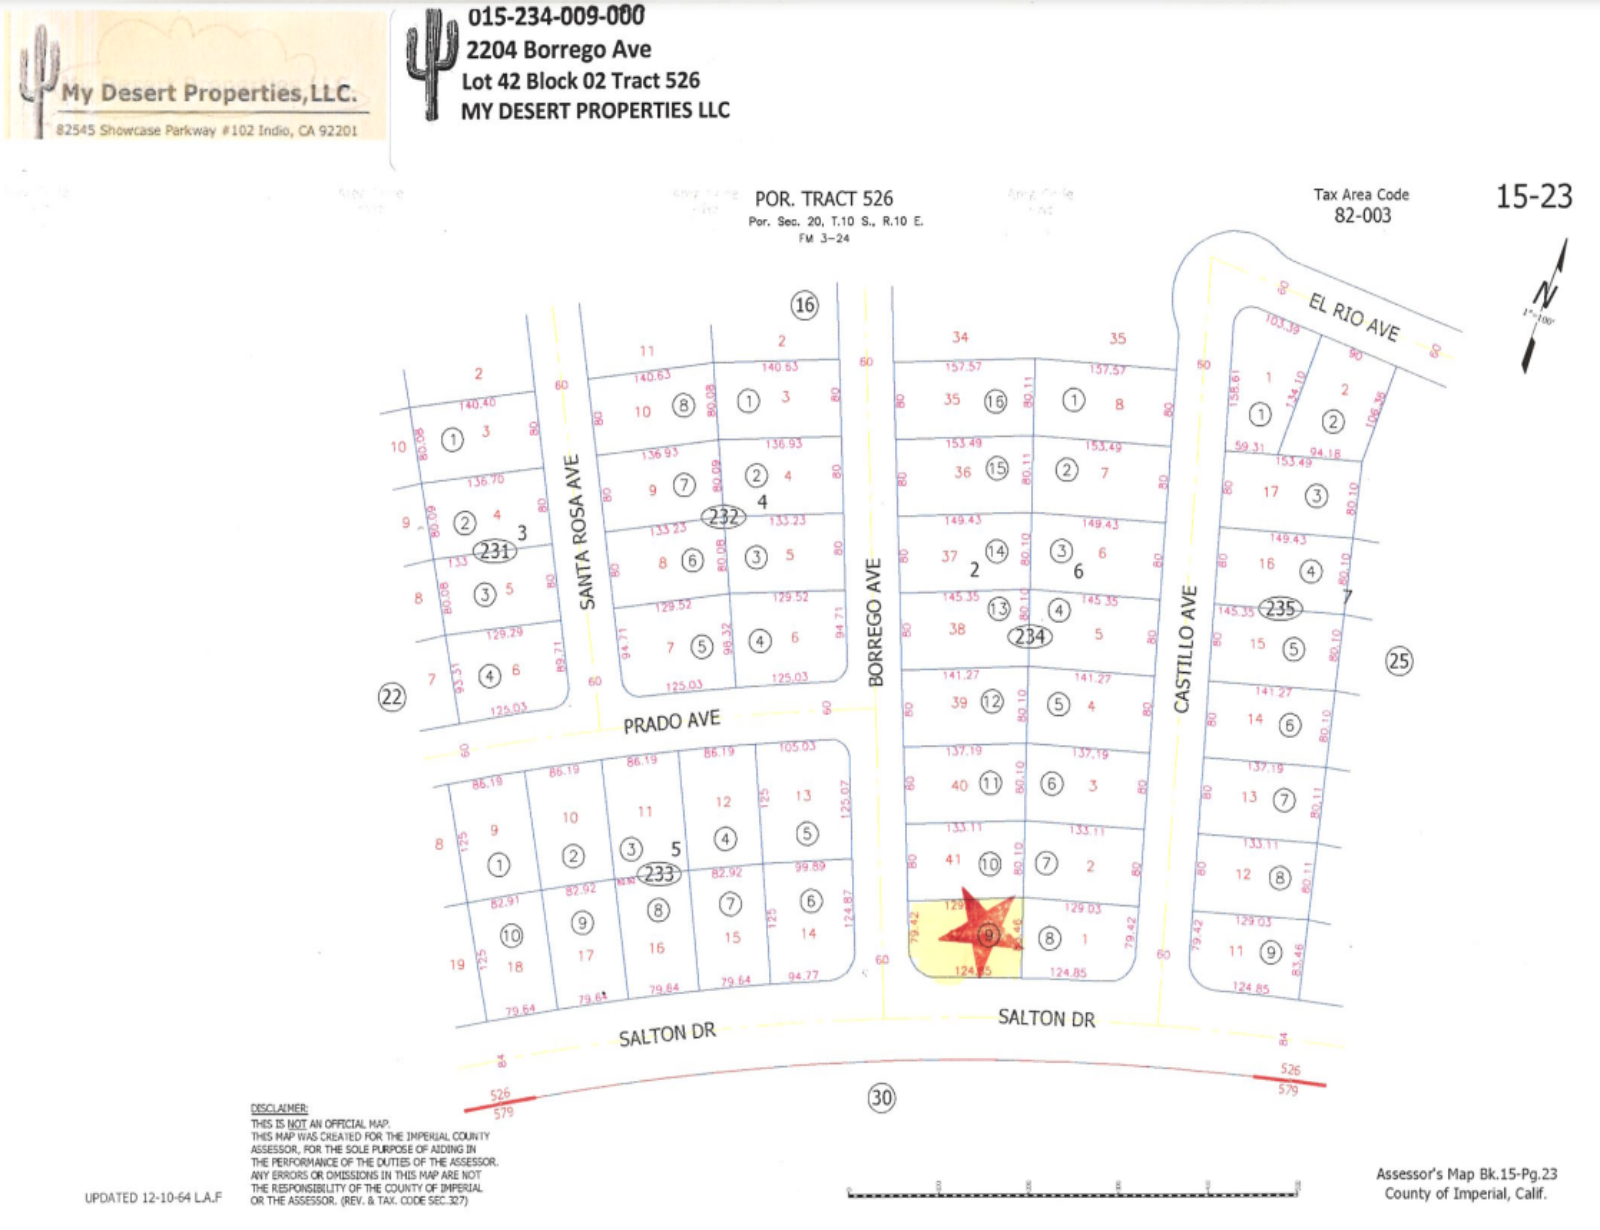 AMAZING RESIDENTIAL CORNER LOT ON MAIN ROAD!! LOW MONTHLY PAYMENTS OF $150.00  2204 Borrego Ave., Salton City, CA 92275  APN: 015-234-009-000 - Get Land Today